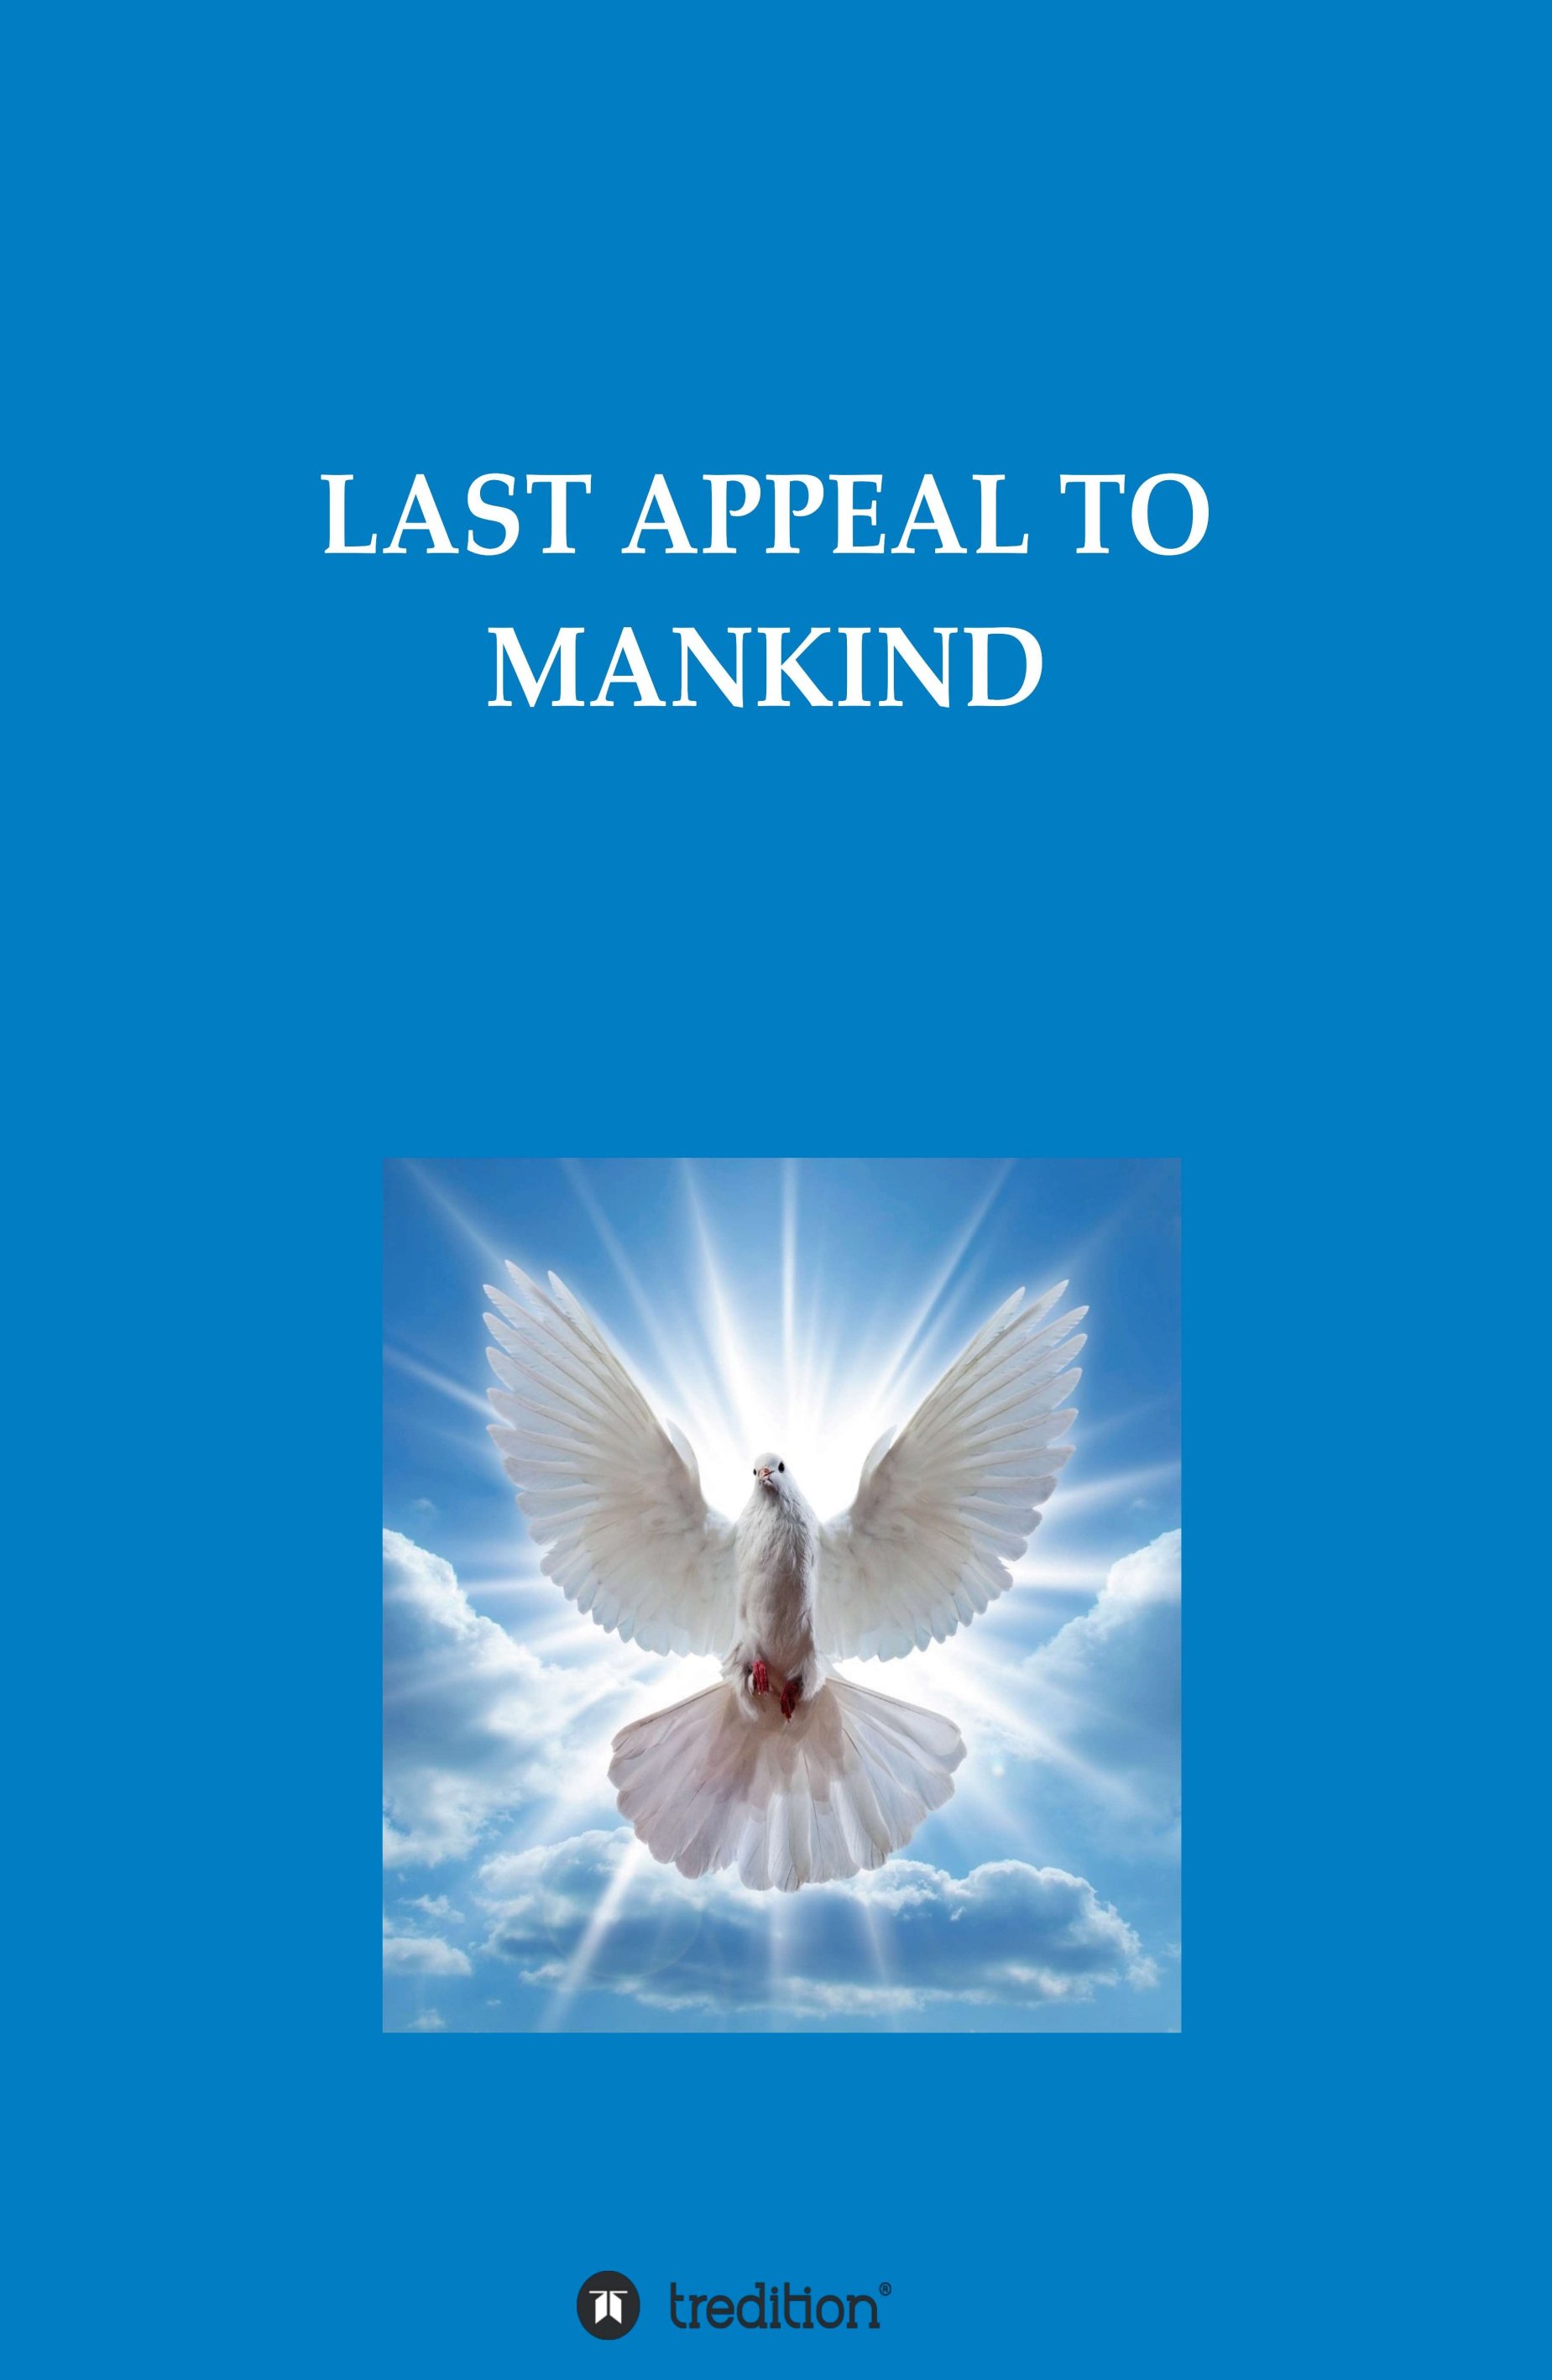 LAST APPEAL TO MANKIND - An urgent message from God